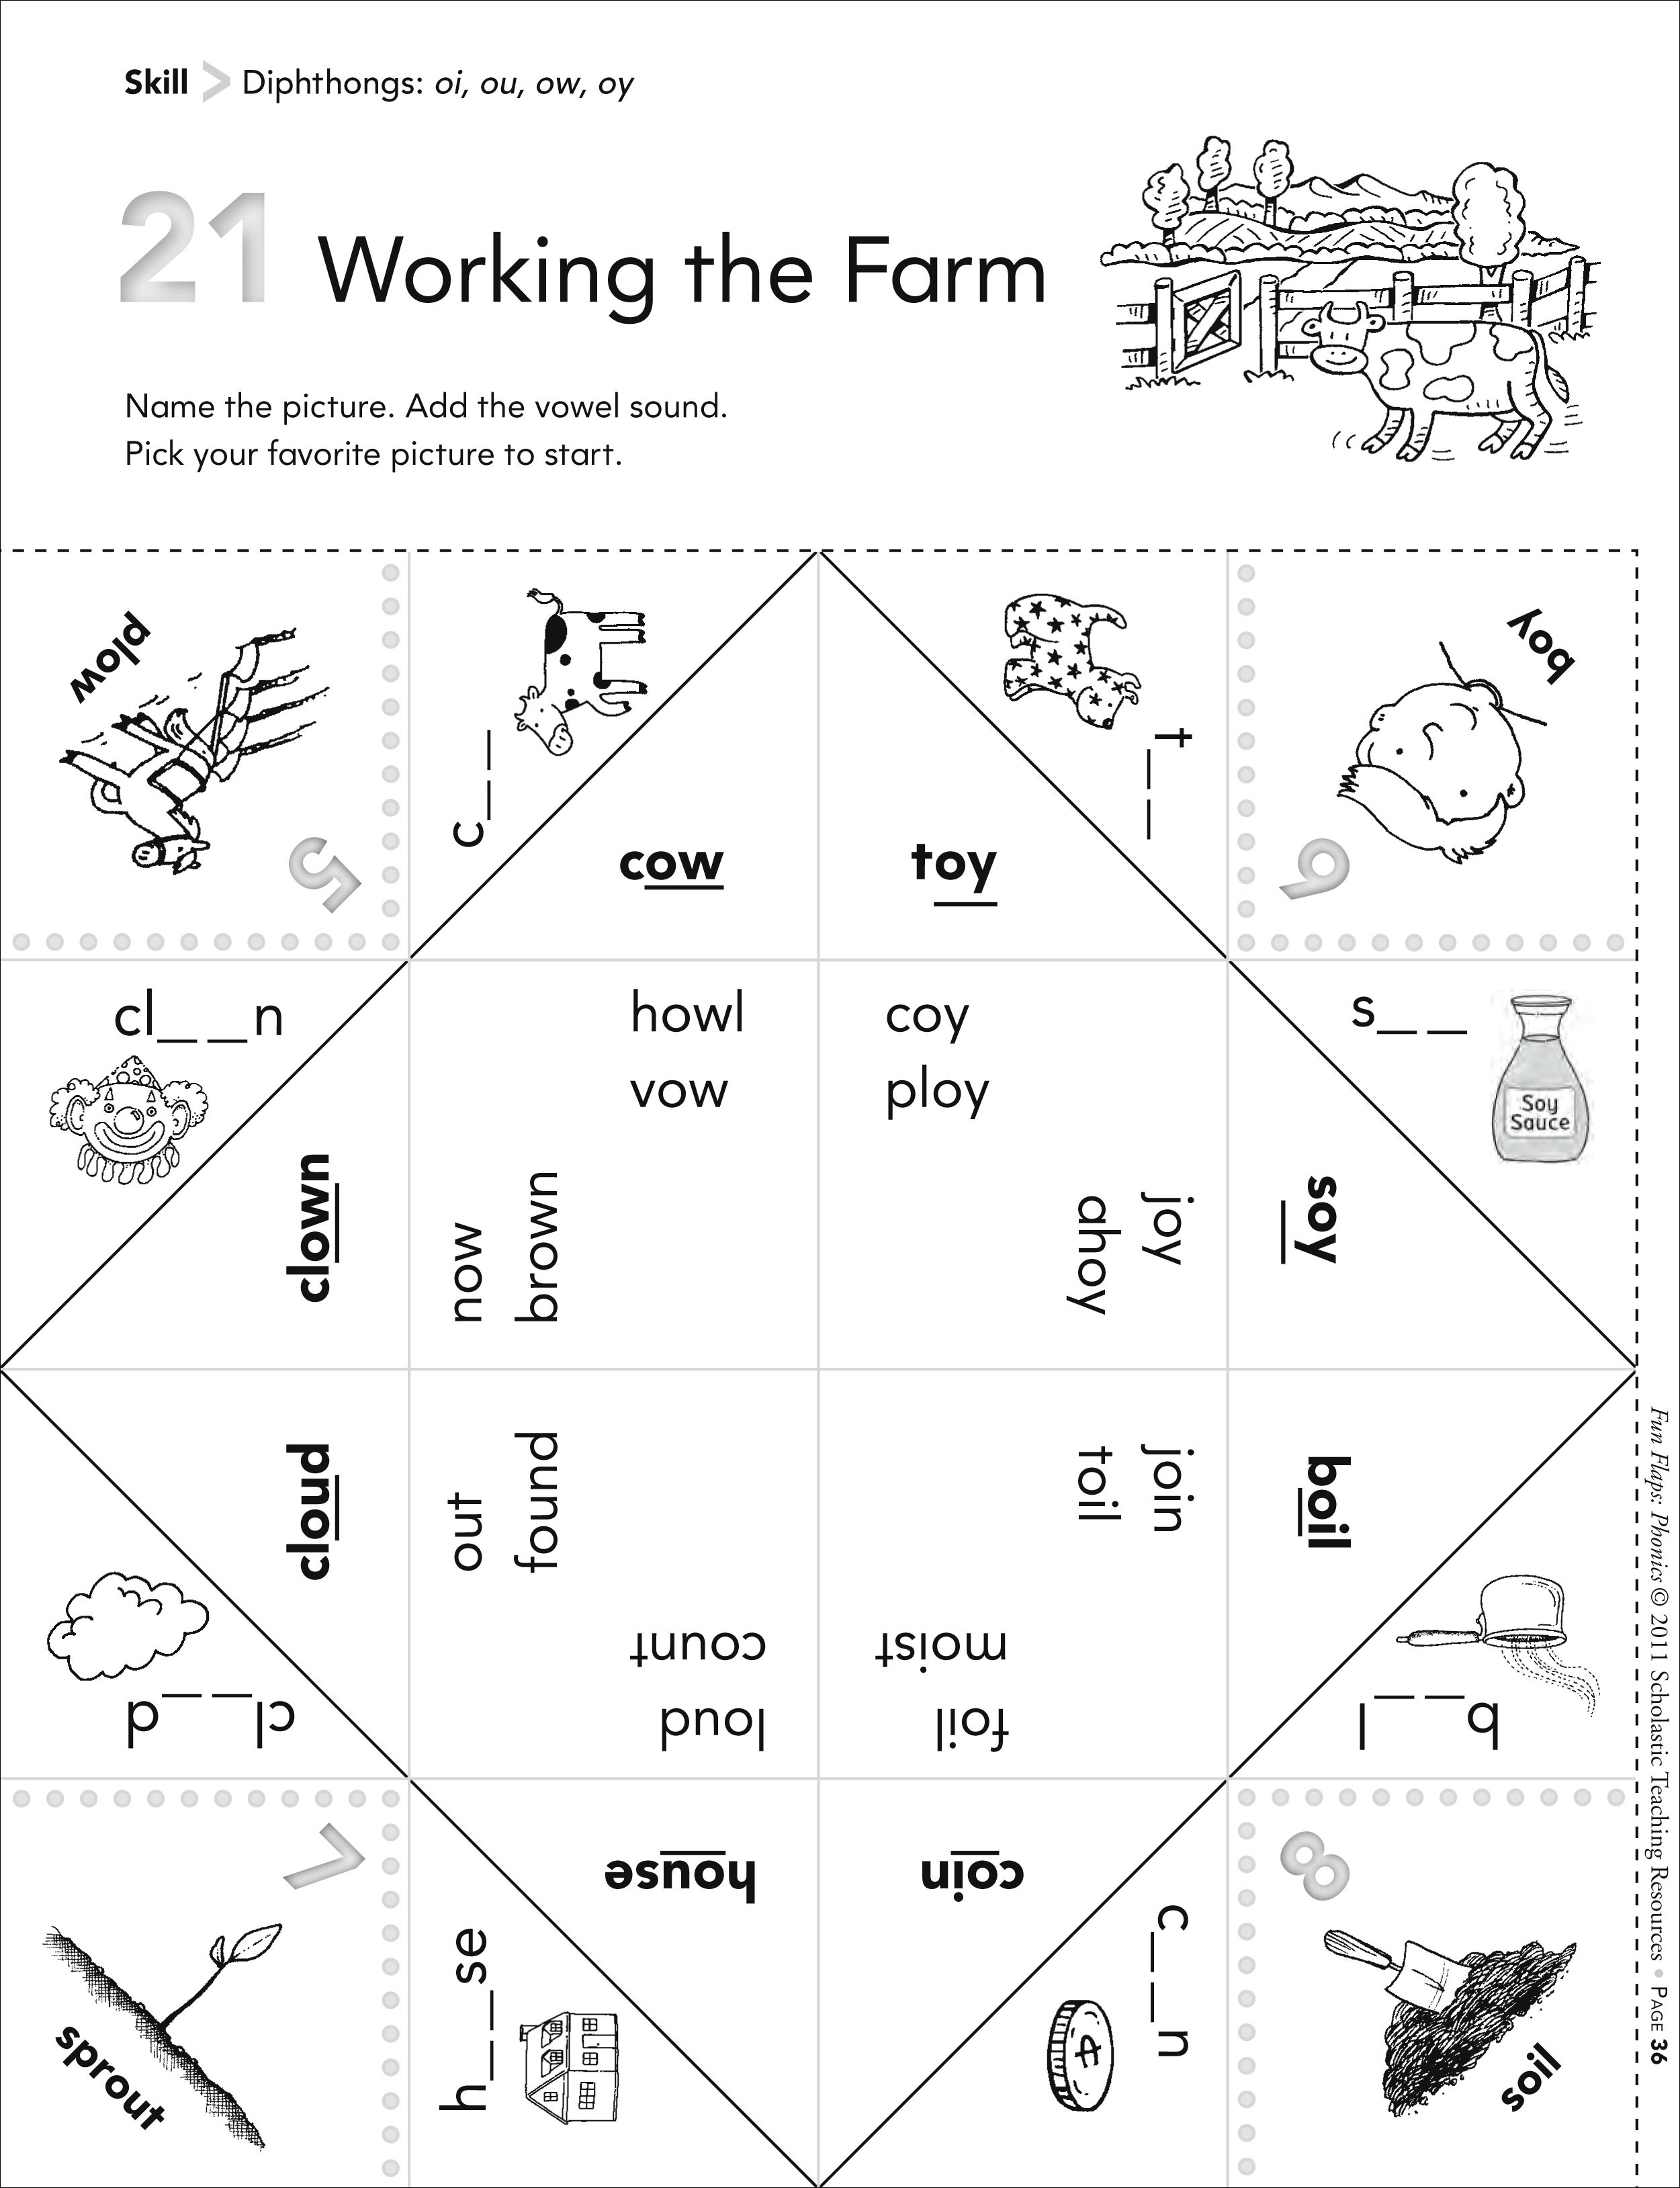 Diphthongs Oi and Oy Worksheets Image